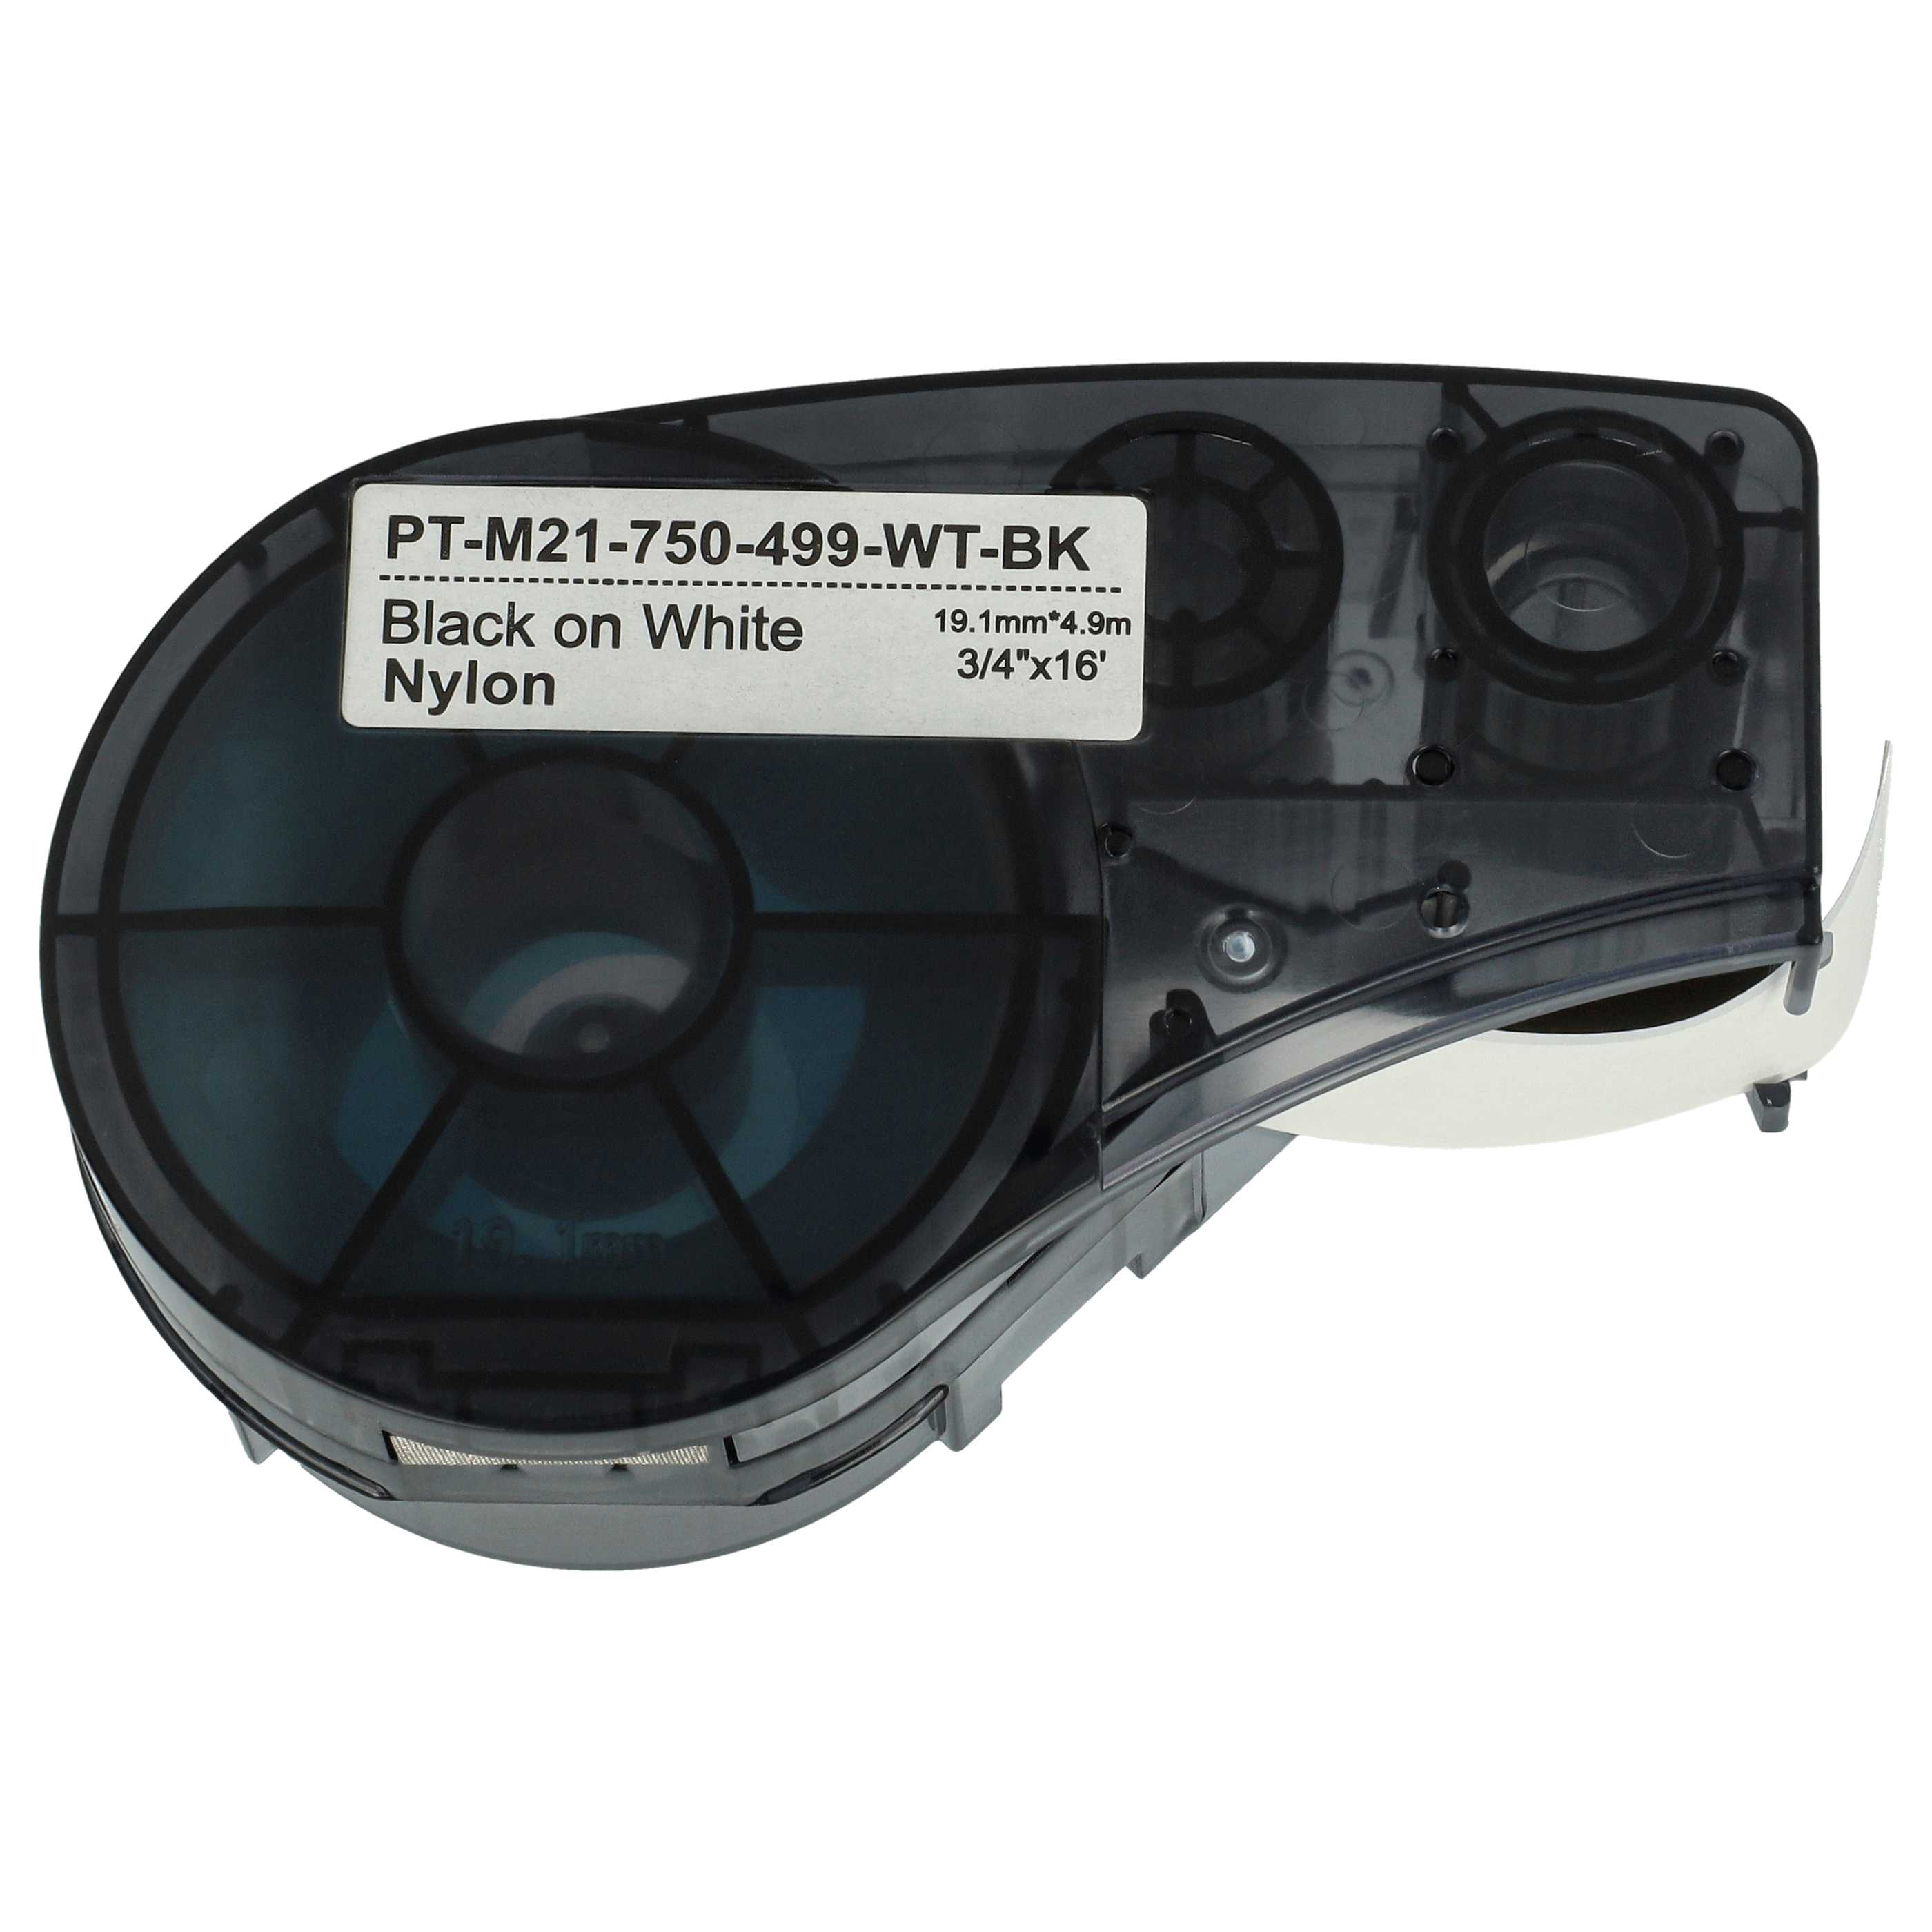 5x Label Tape as Replacement for Brady BM21-750-499 - 19.05 mm Black to White, nylon